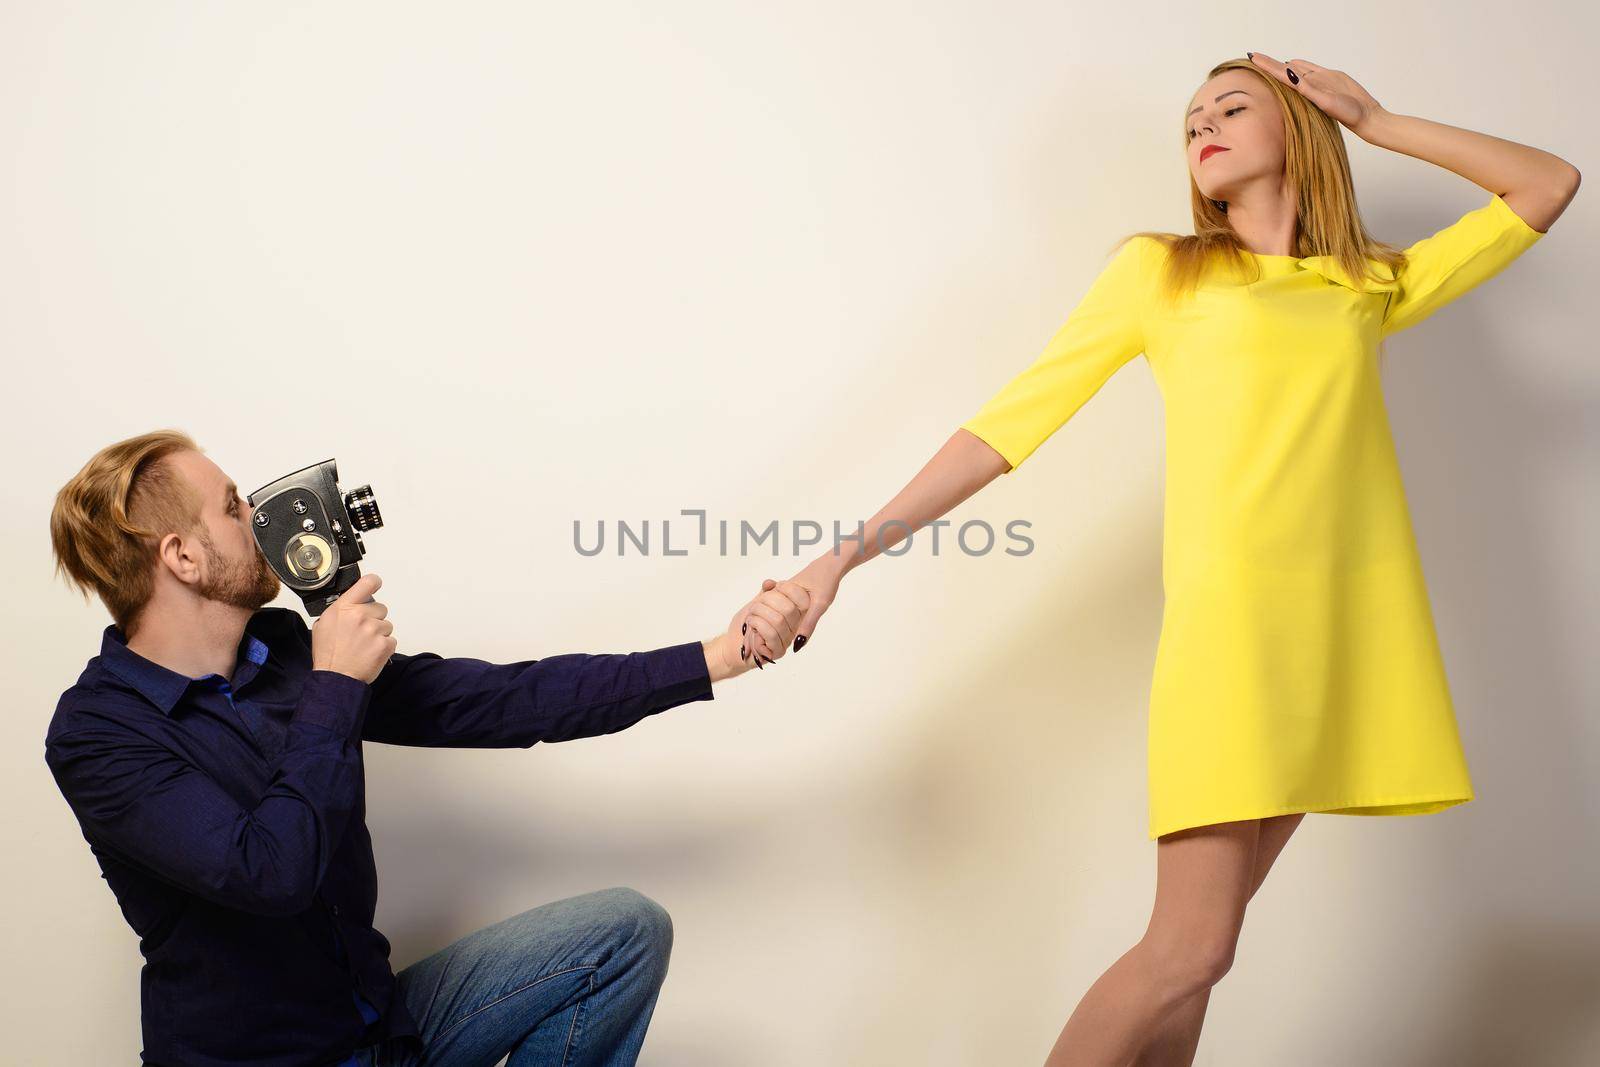 Stylish man in a blue shirt is filming a slim woman in a yellow dress with an old camera